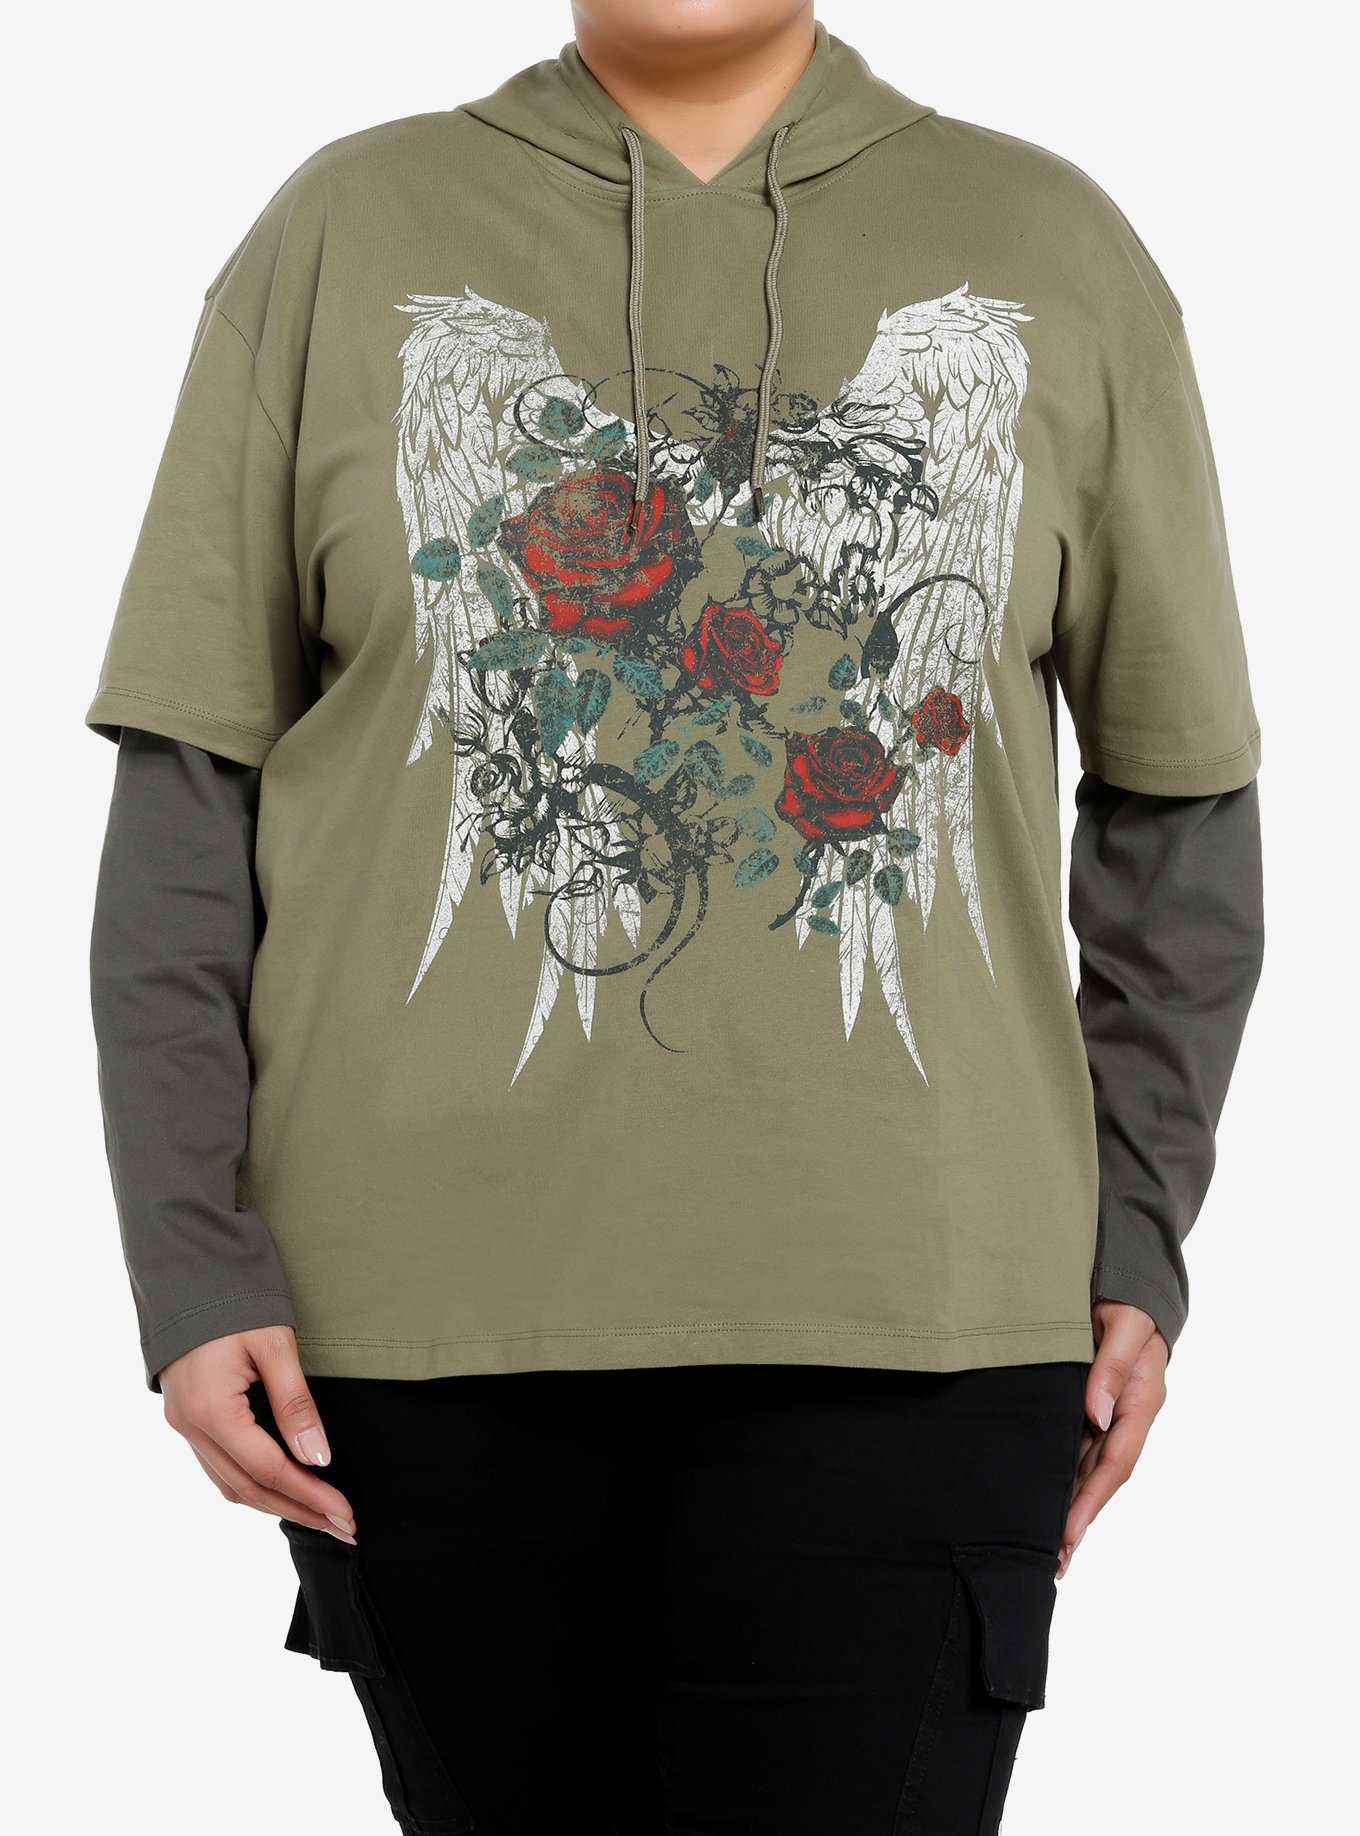 Social Collision Angel Wings Twofer Hooded Girls Long-Sleeve T-Shirt Plus Size, , hi-res